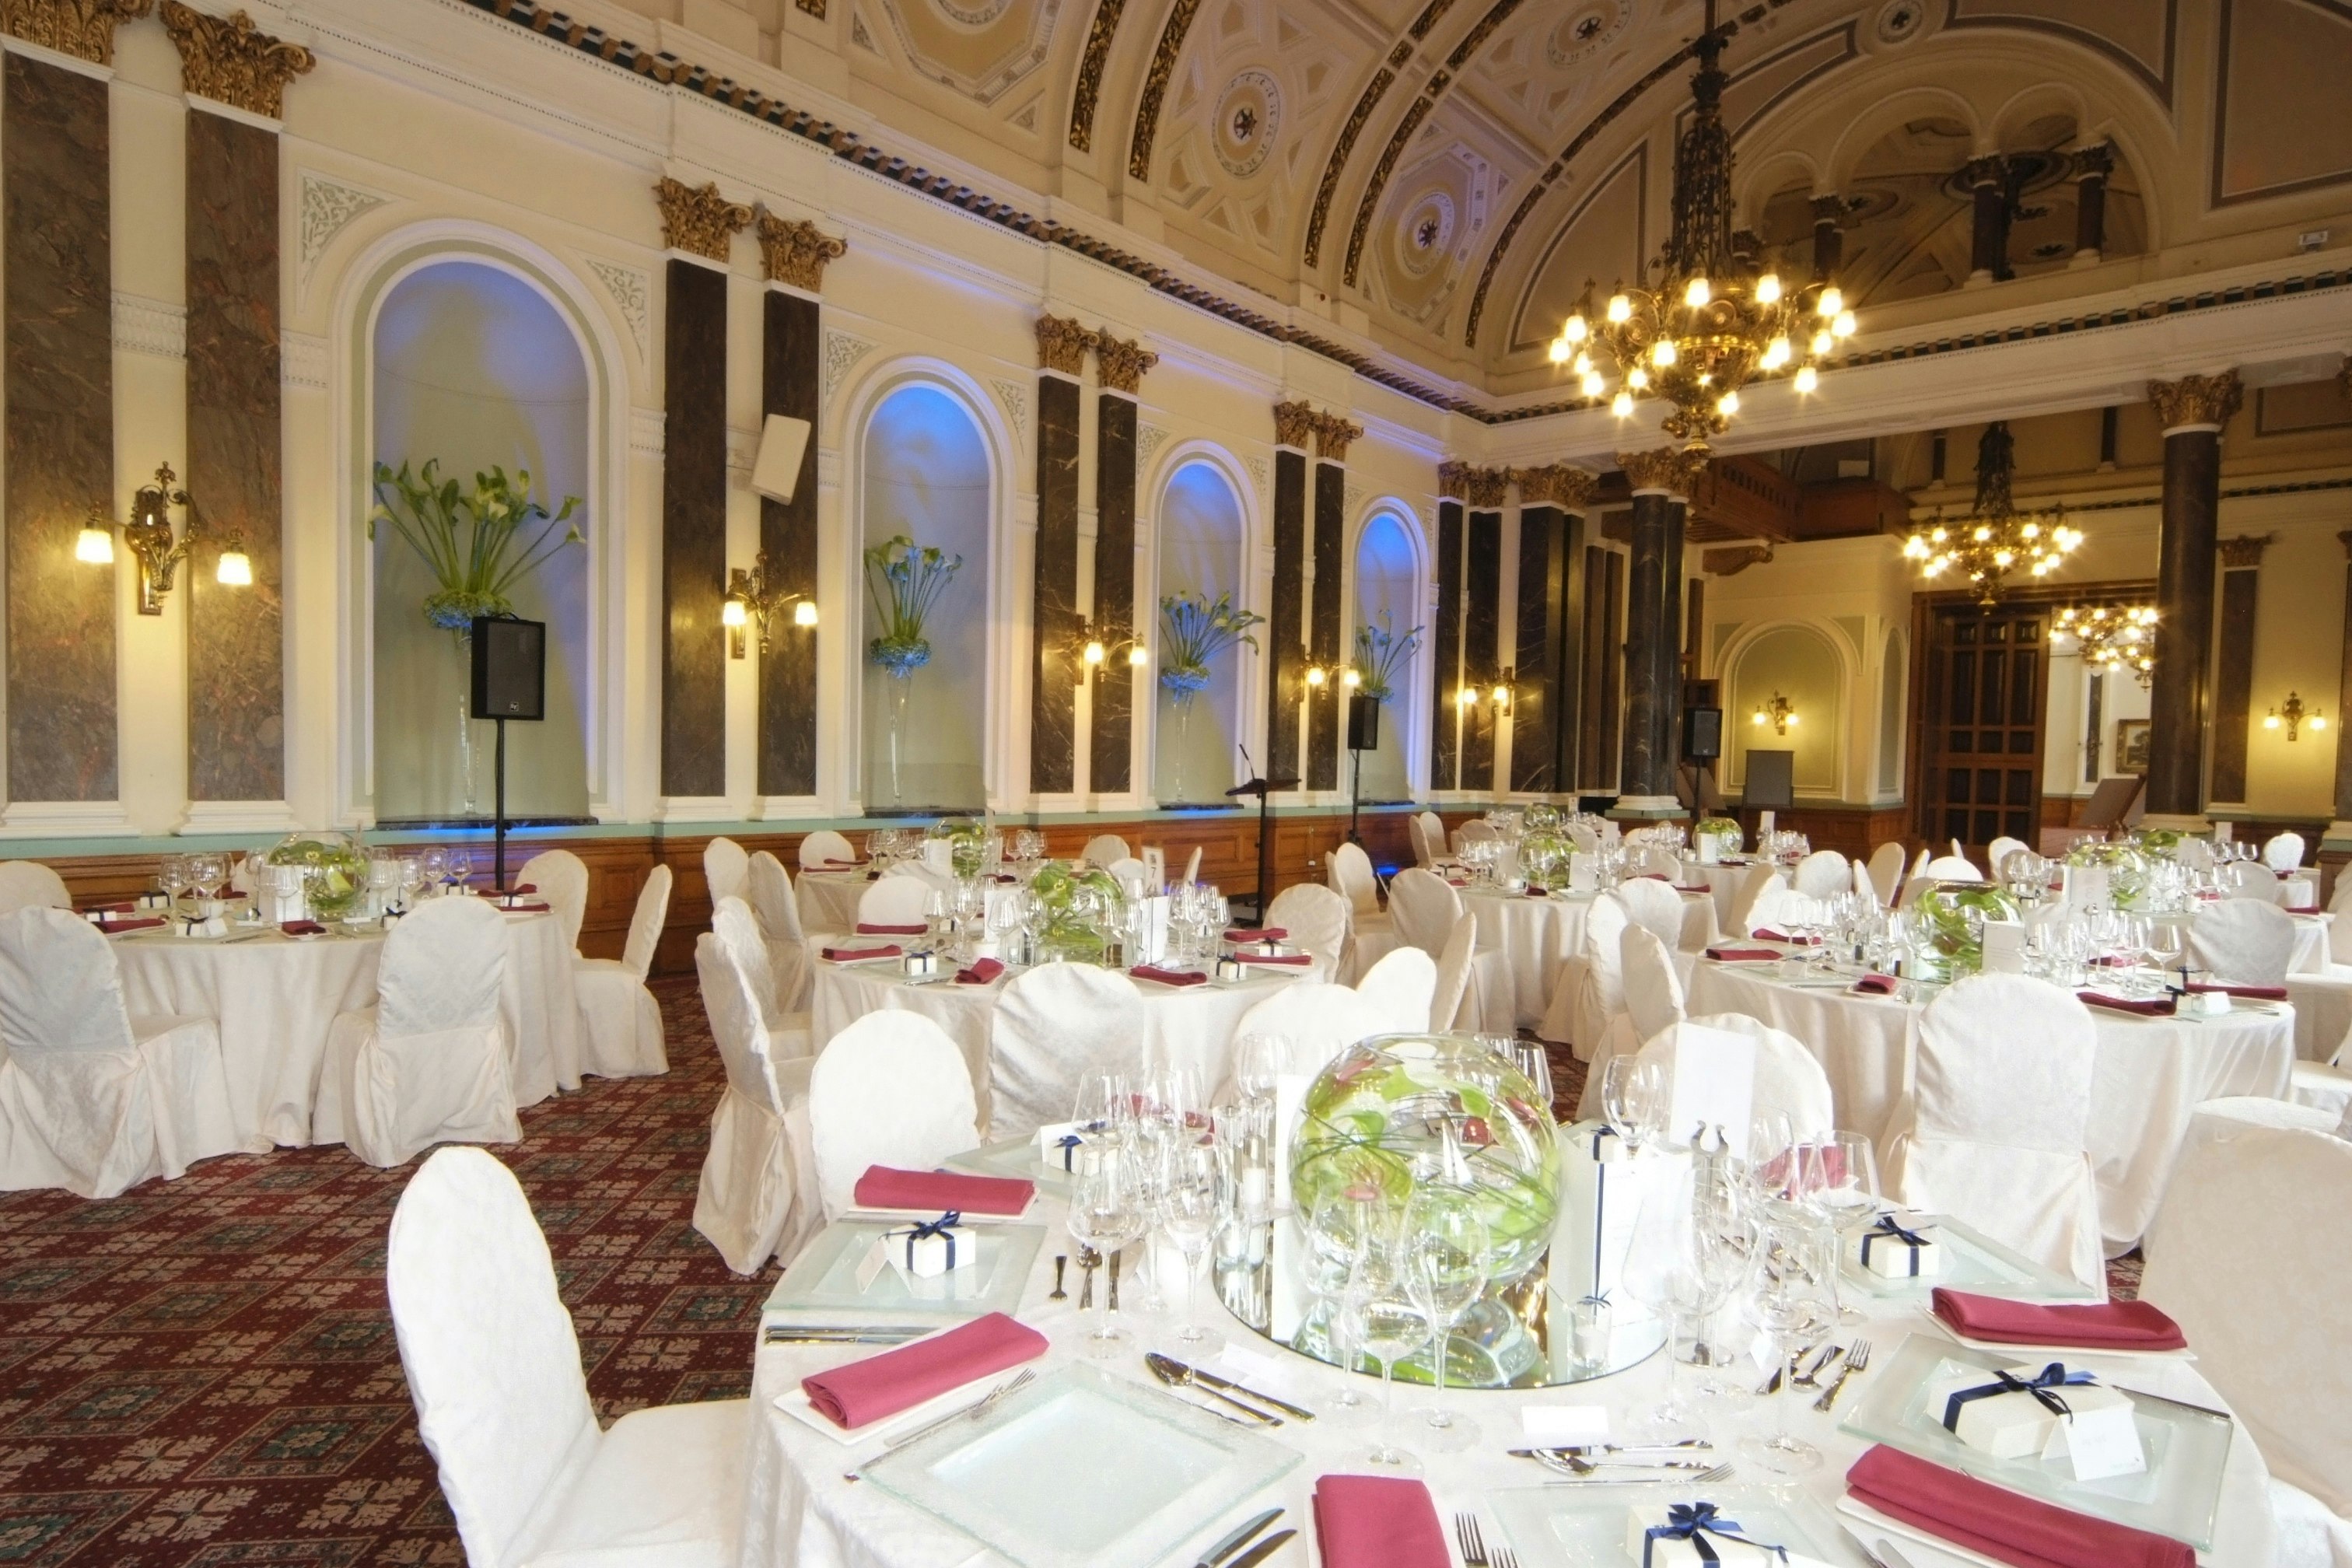 Large Party Venues in Birmingham - The Council House